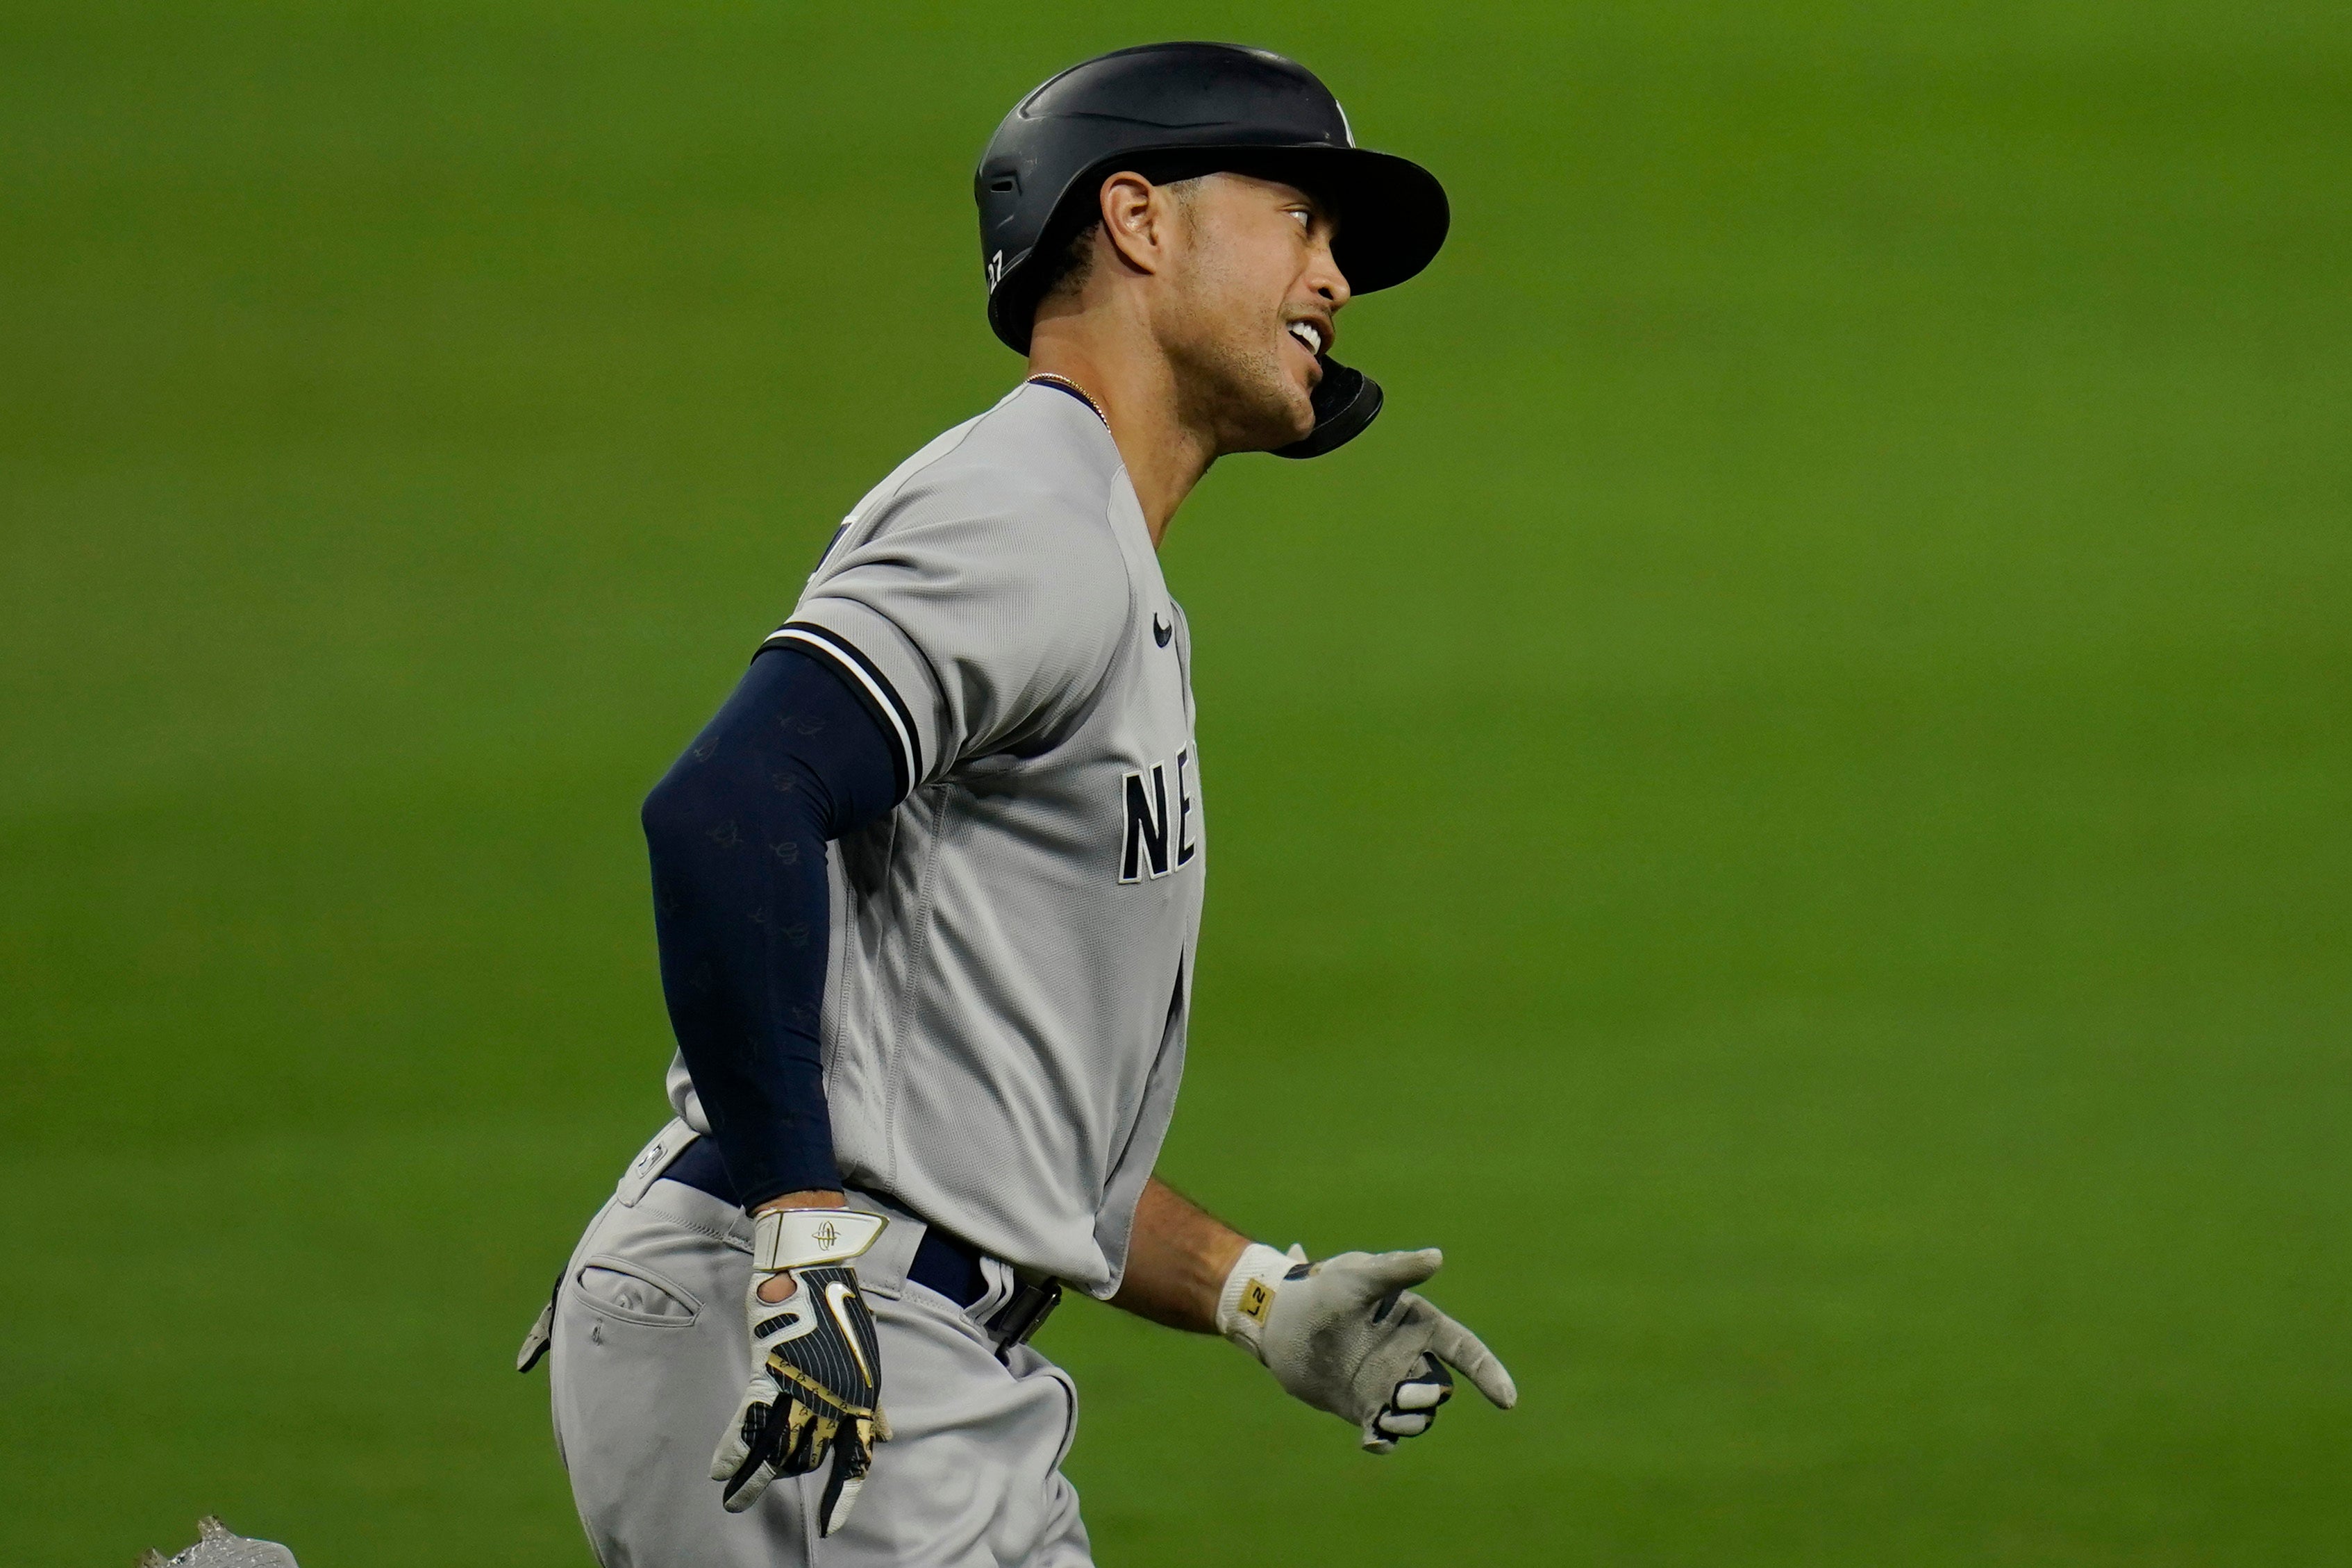 Giancarlo Stanton leaves game after hit during swing 